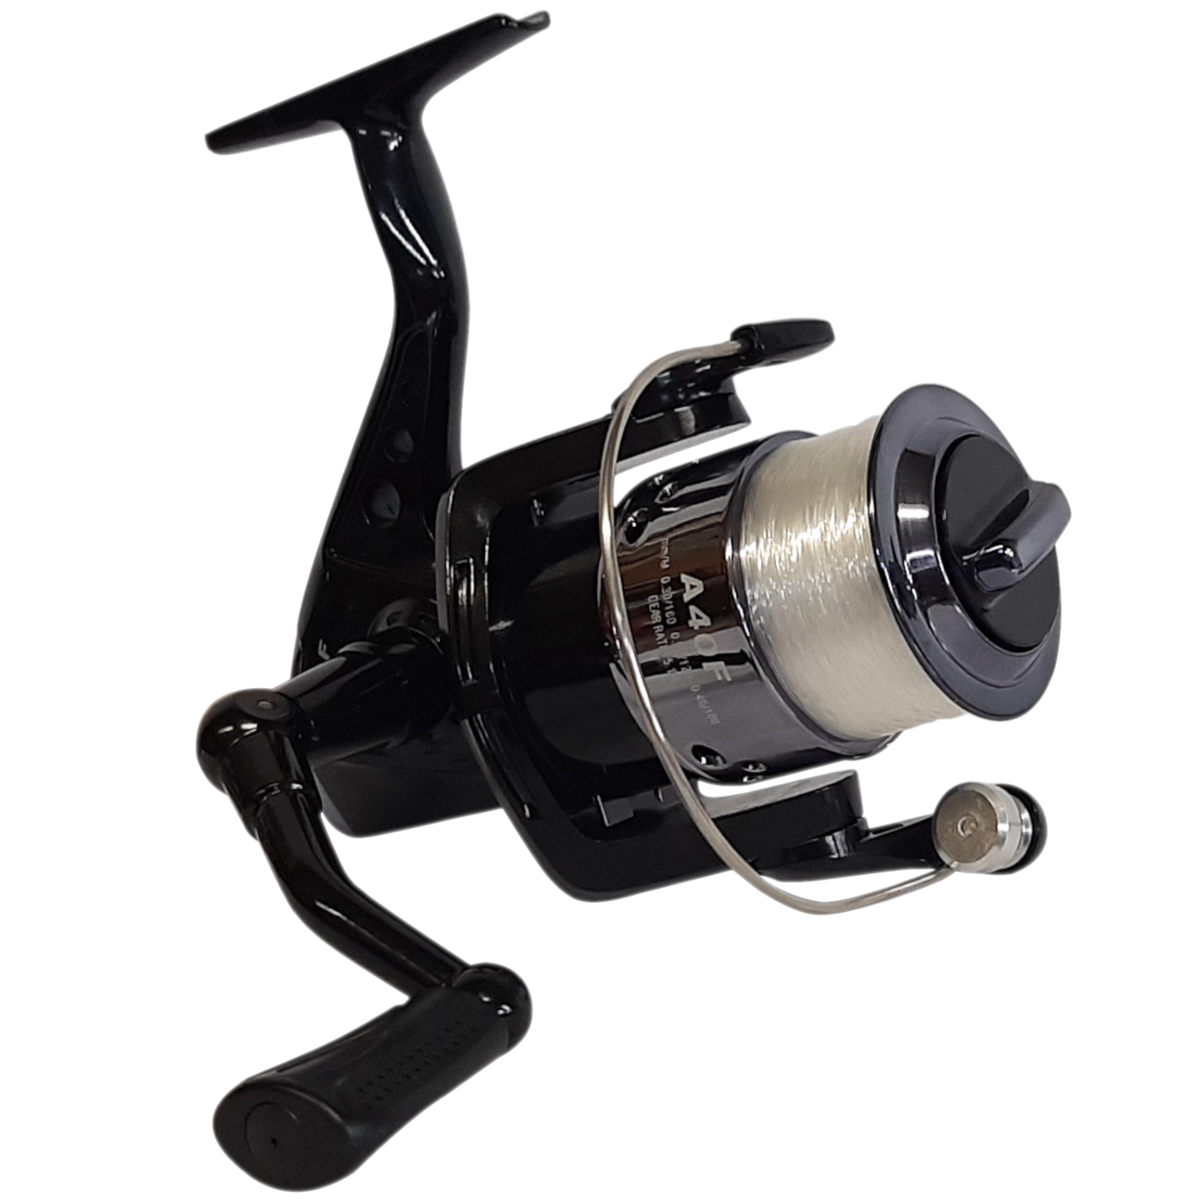 Aqua 40 Fishing Spinning Reel With White Line